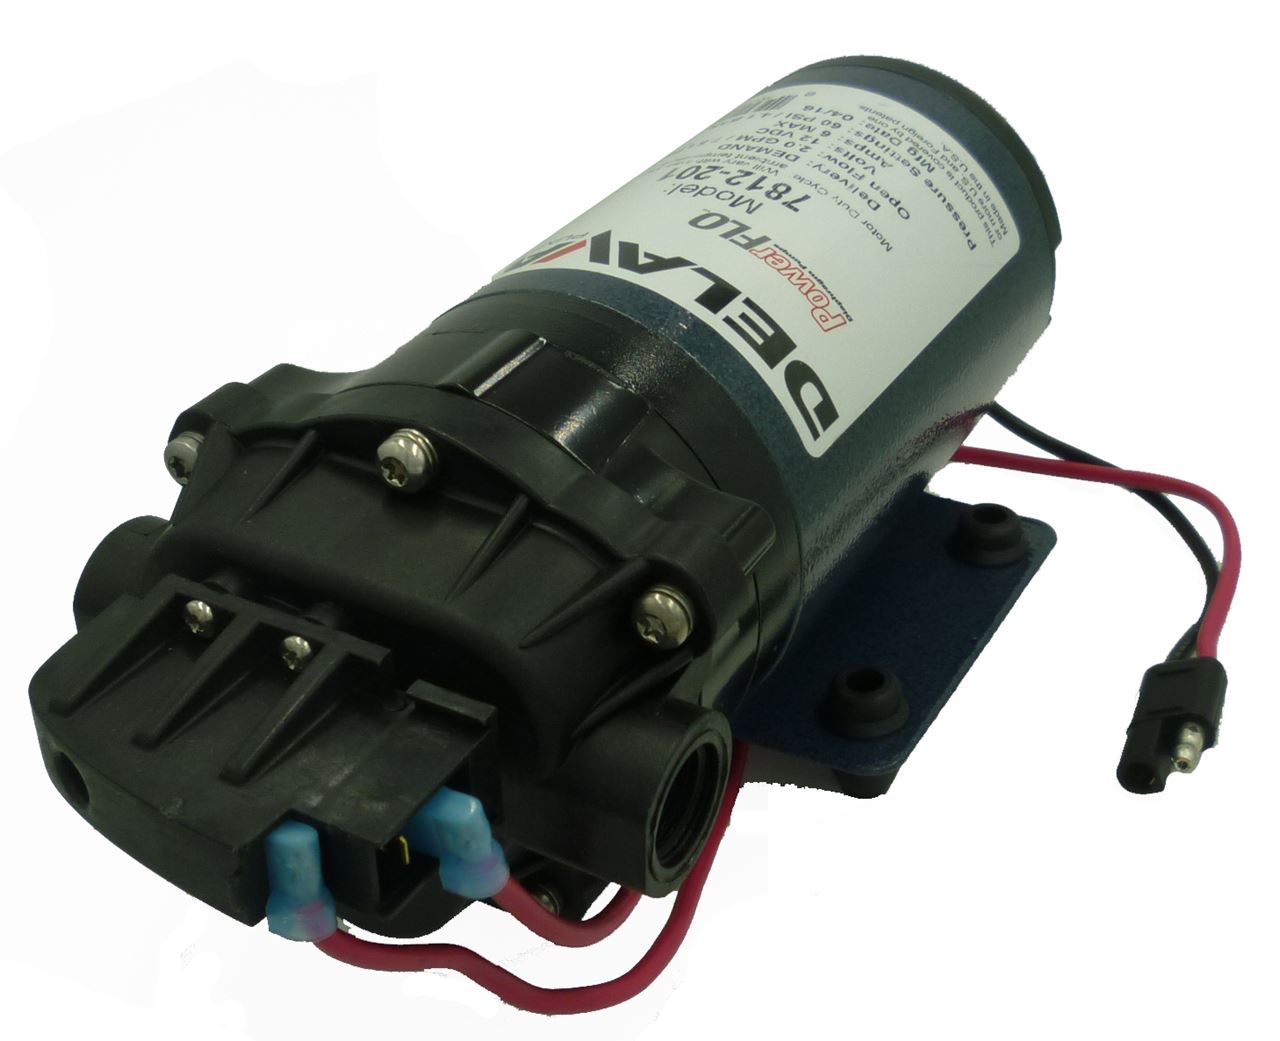 7812 Series Pump with Pressure Switch Delavan Complete Pump Head Assembly 